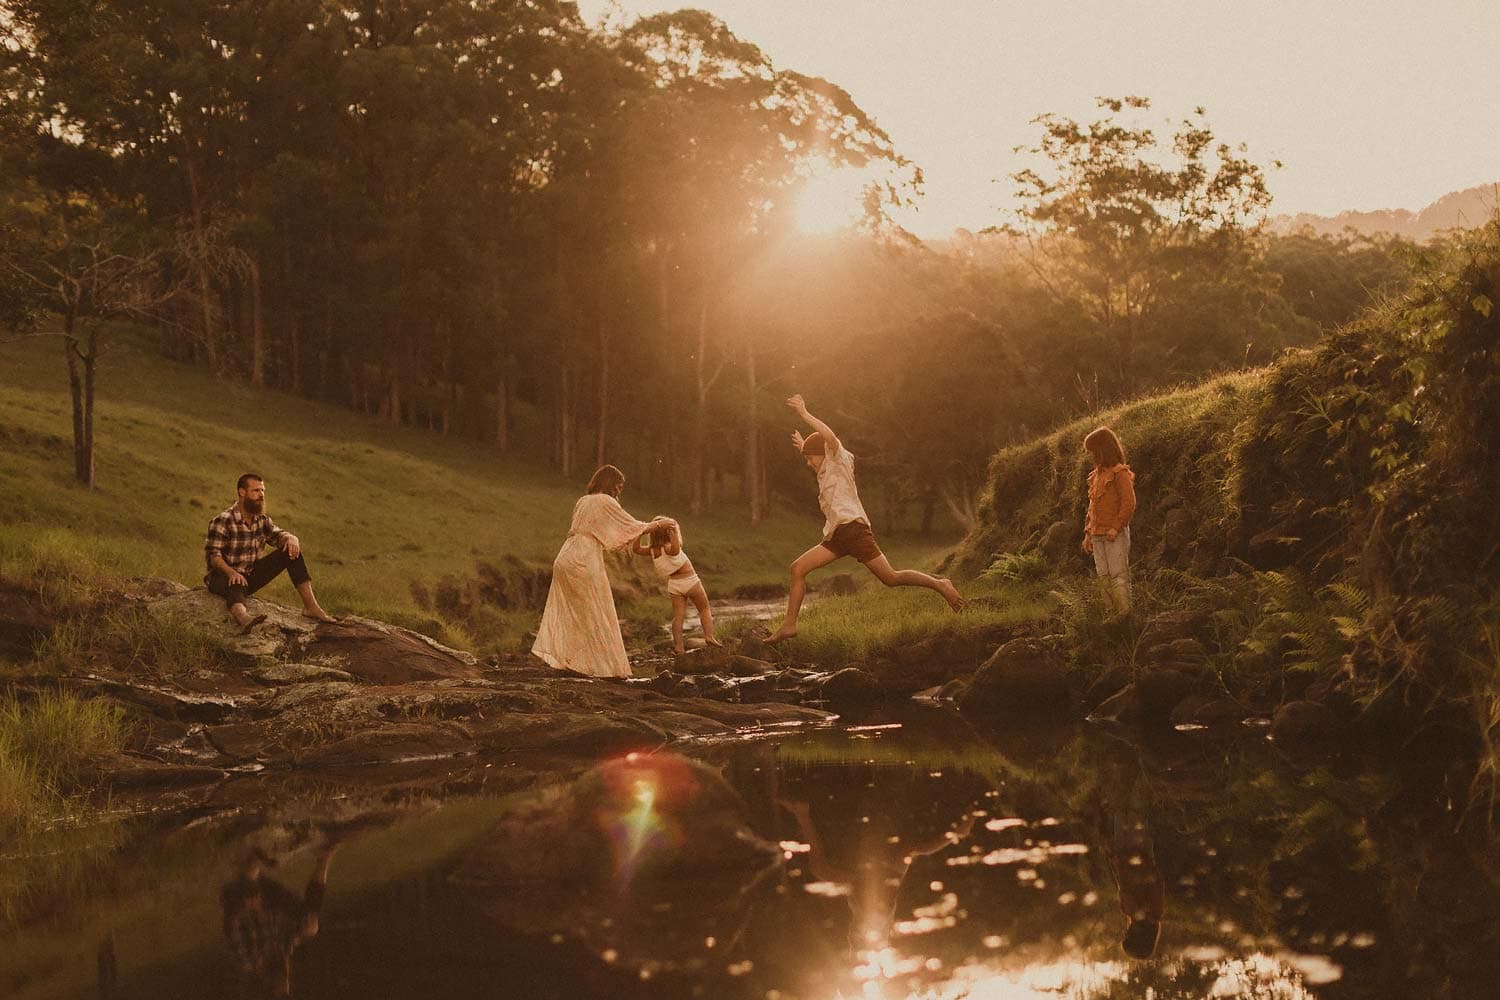 Sydney-family-photographer-sutherland-shire-family-jumping-rocks-in-river-with-boy-leaping-playfully-whilst-mum-helps-youngest-child-and-father-and-daughter-watch-on